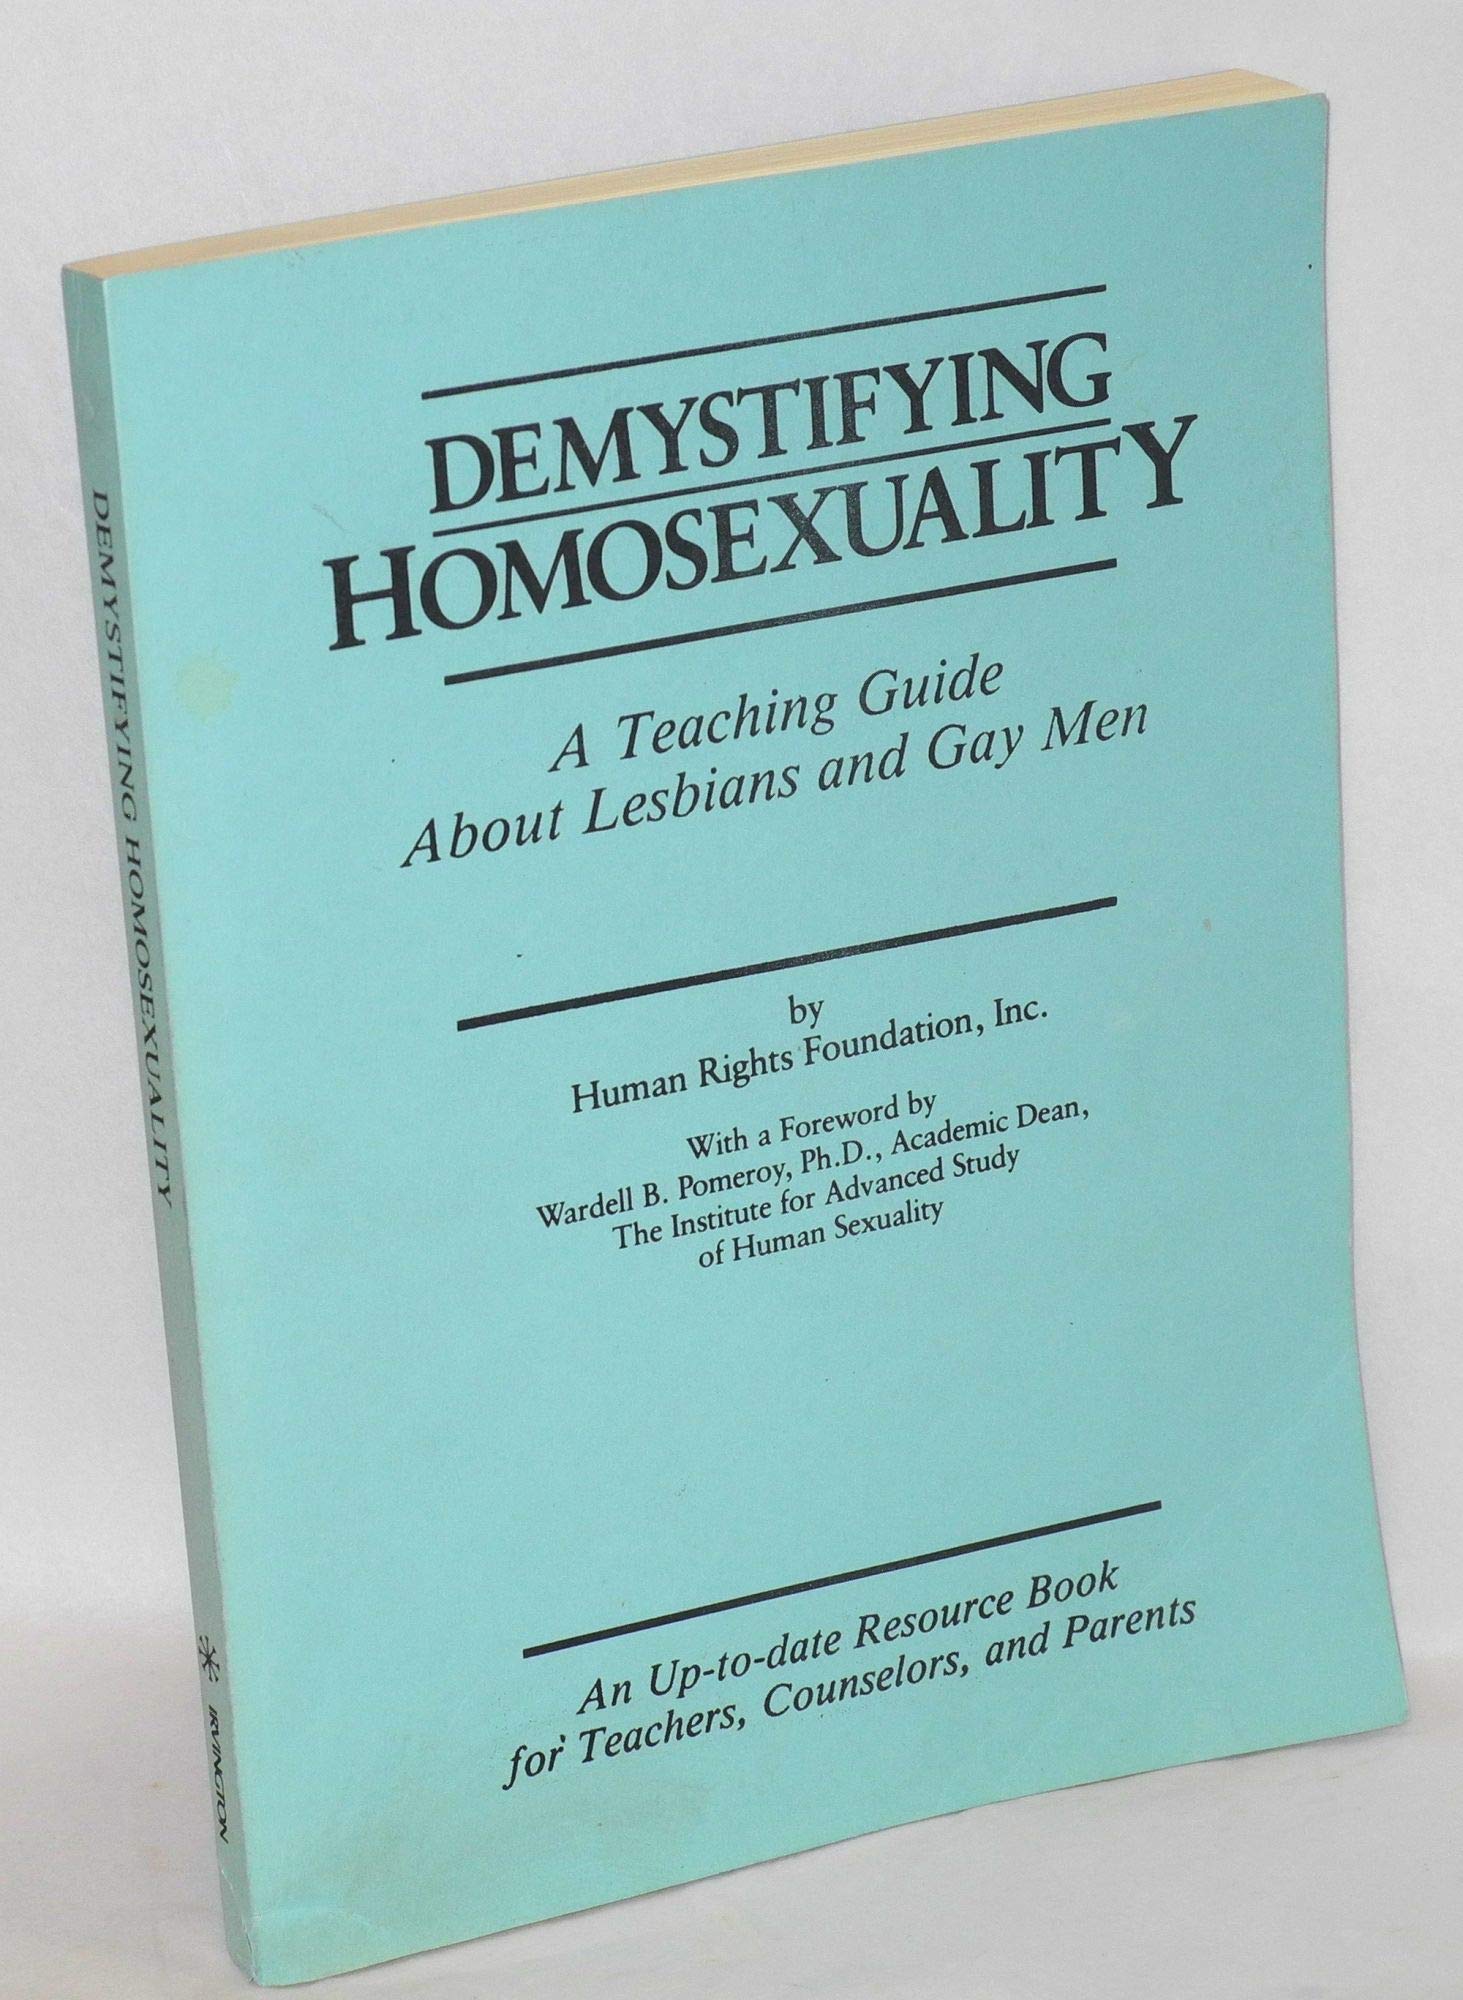 Demystifying homosexuality magazine reviews